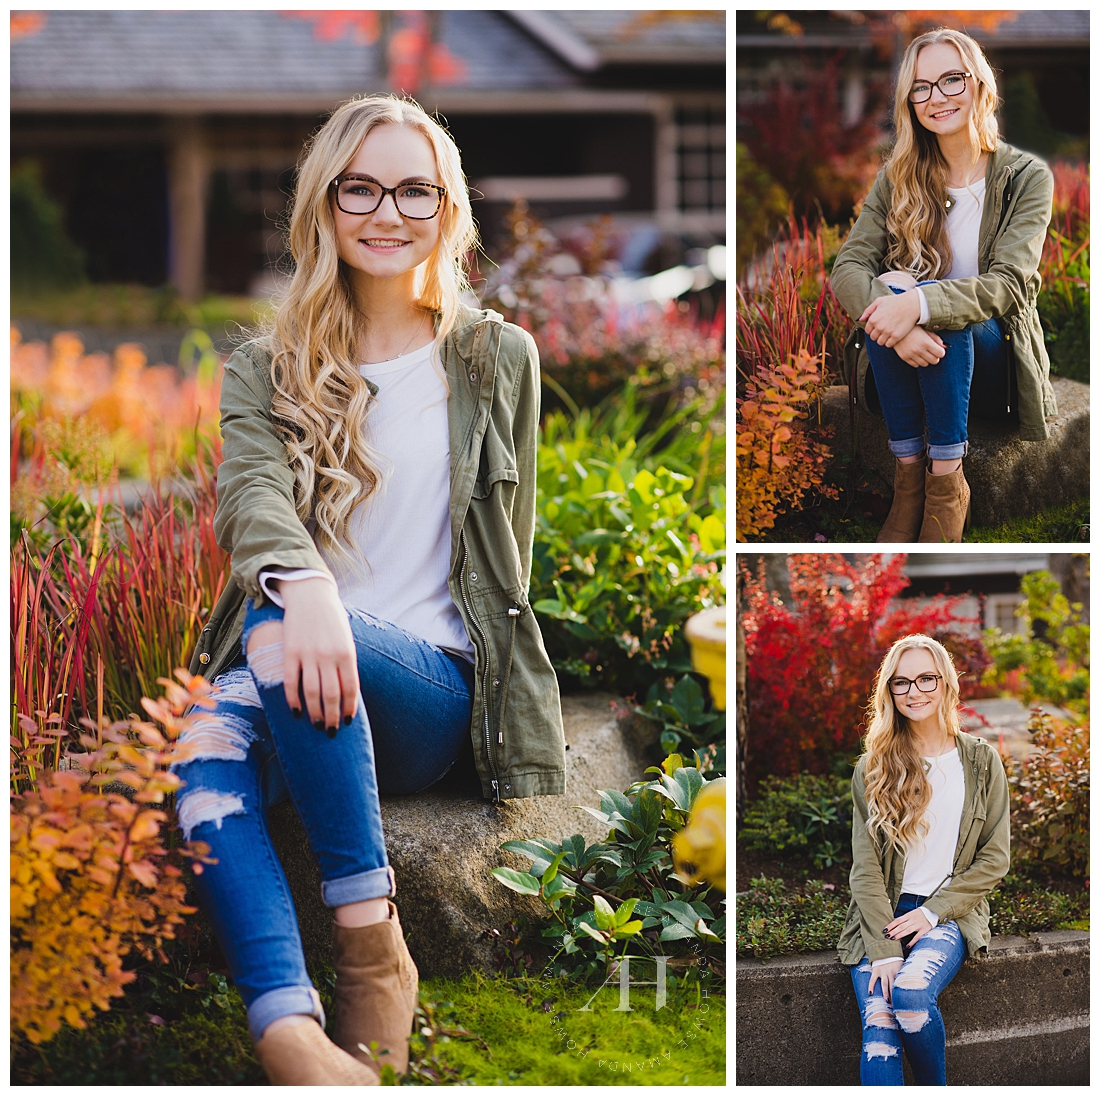 Autumn Colors for the Best Outdoor Senior Portraits photographed by Amanda Howse